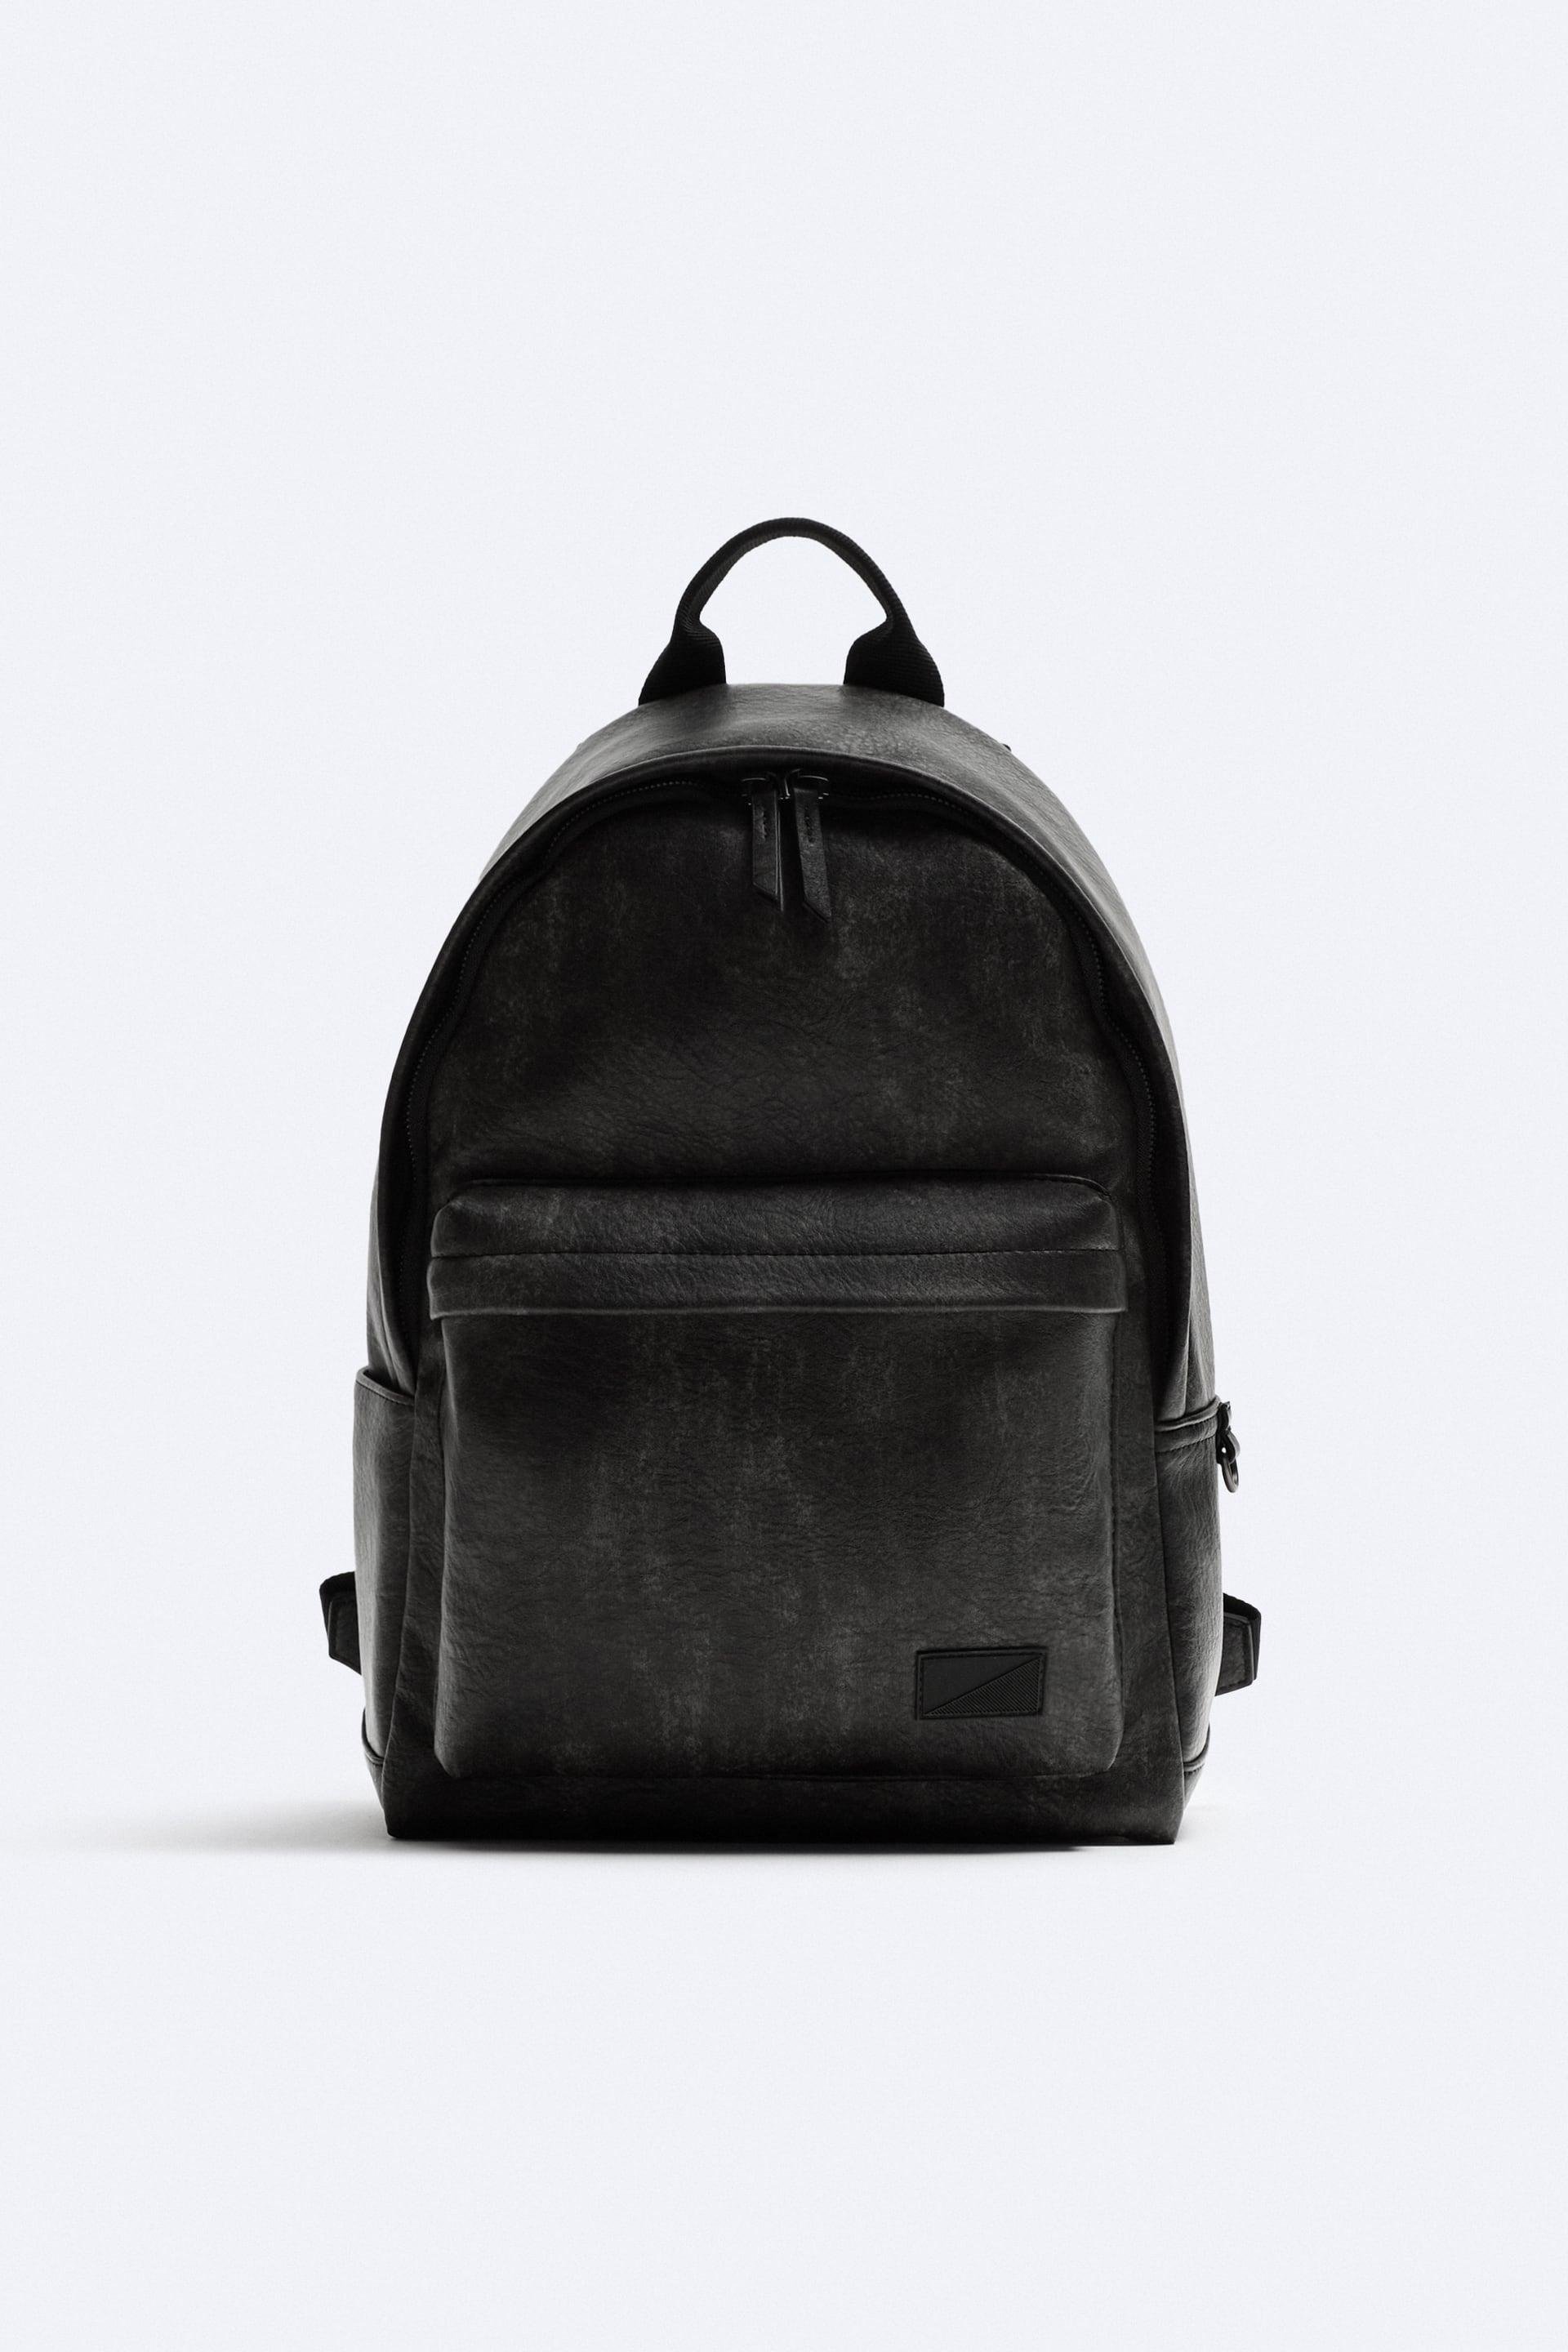 TUMBLED DISTRESSED LEATHER BACKPACK by ZARA